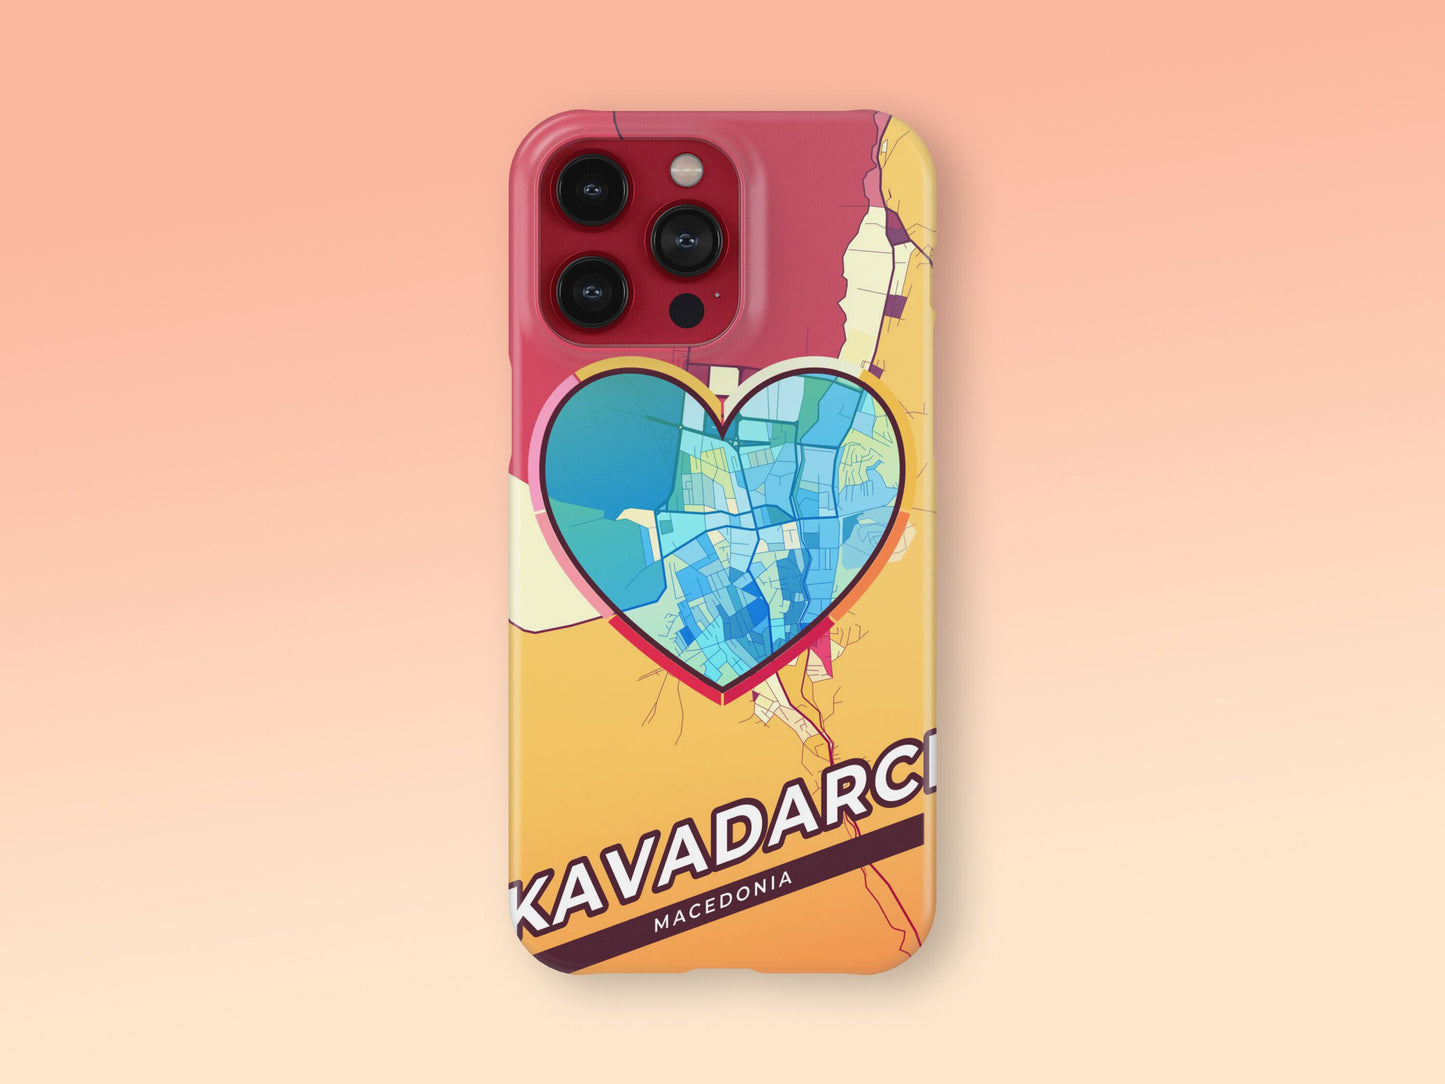 Kavadarci North Macedonia slim phone case with colorful icon. Birthday, wedding or housewarming gift. Couple match cases. 2